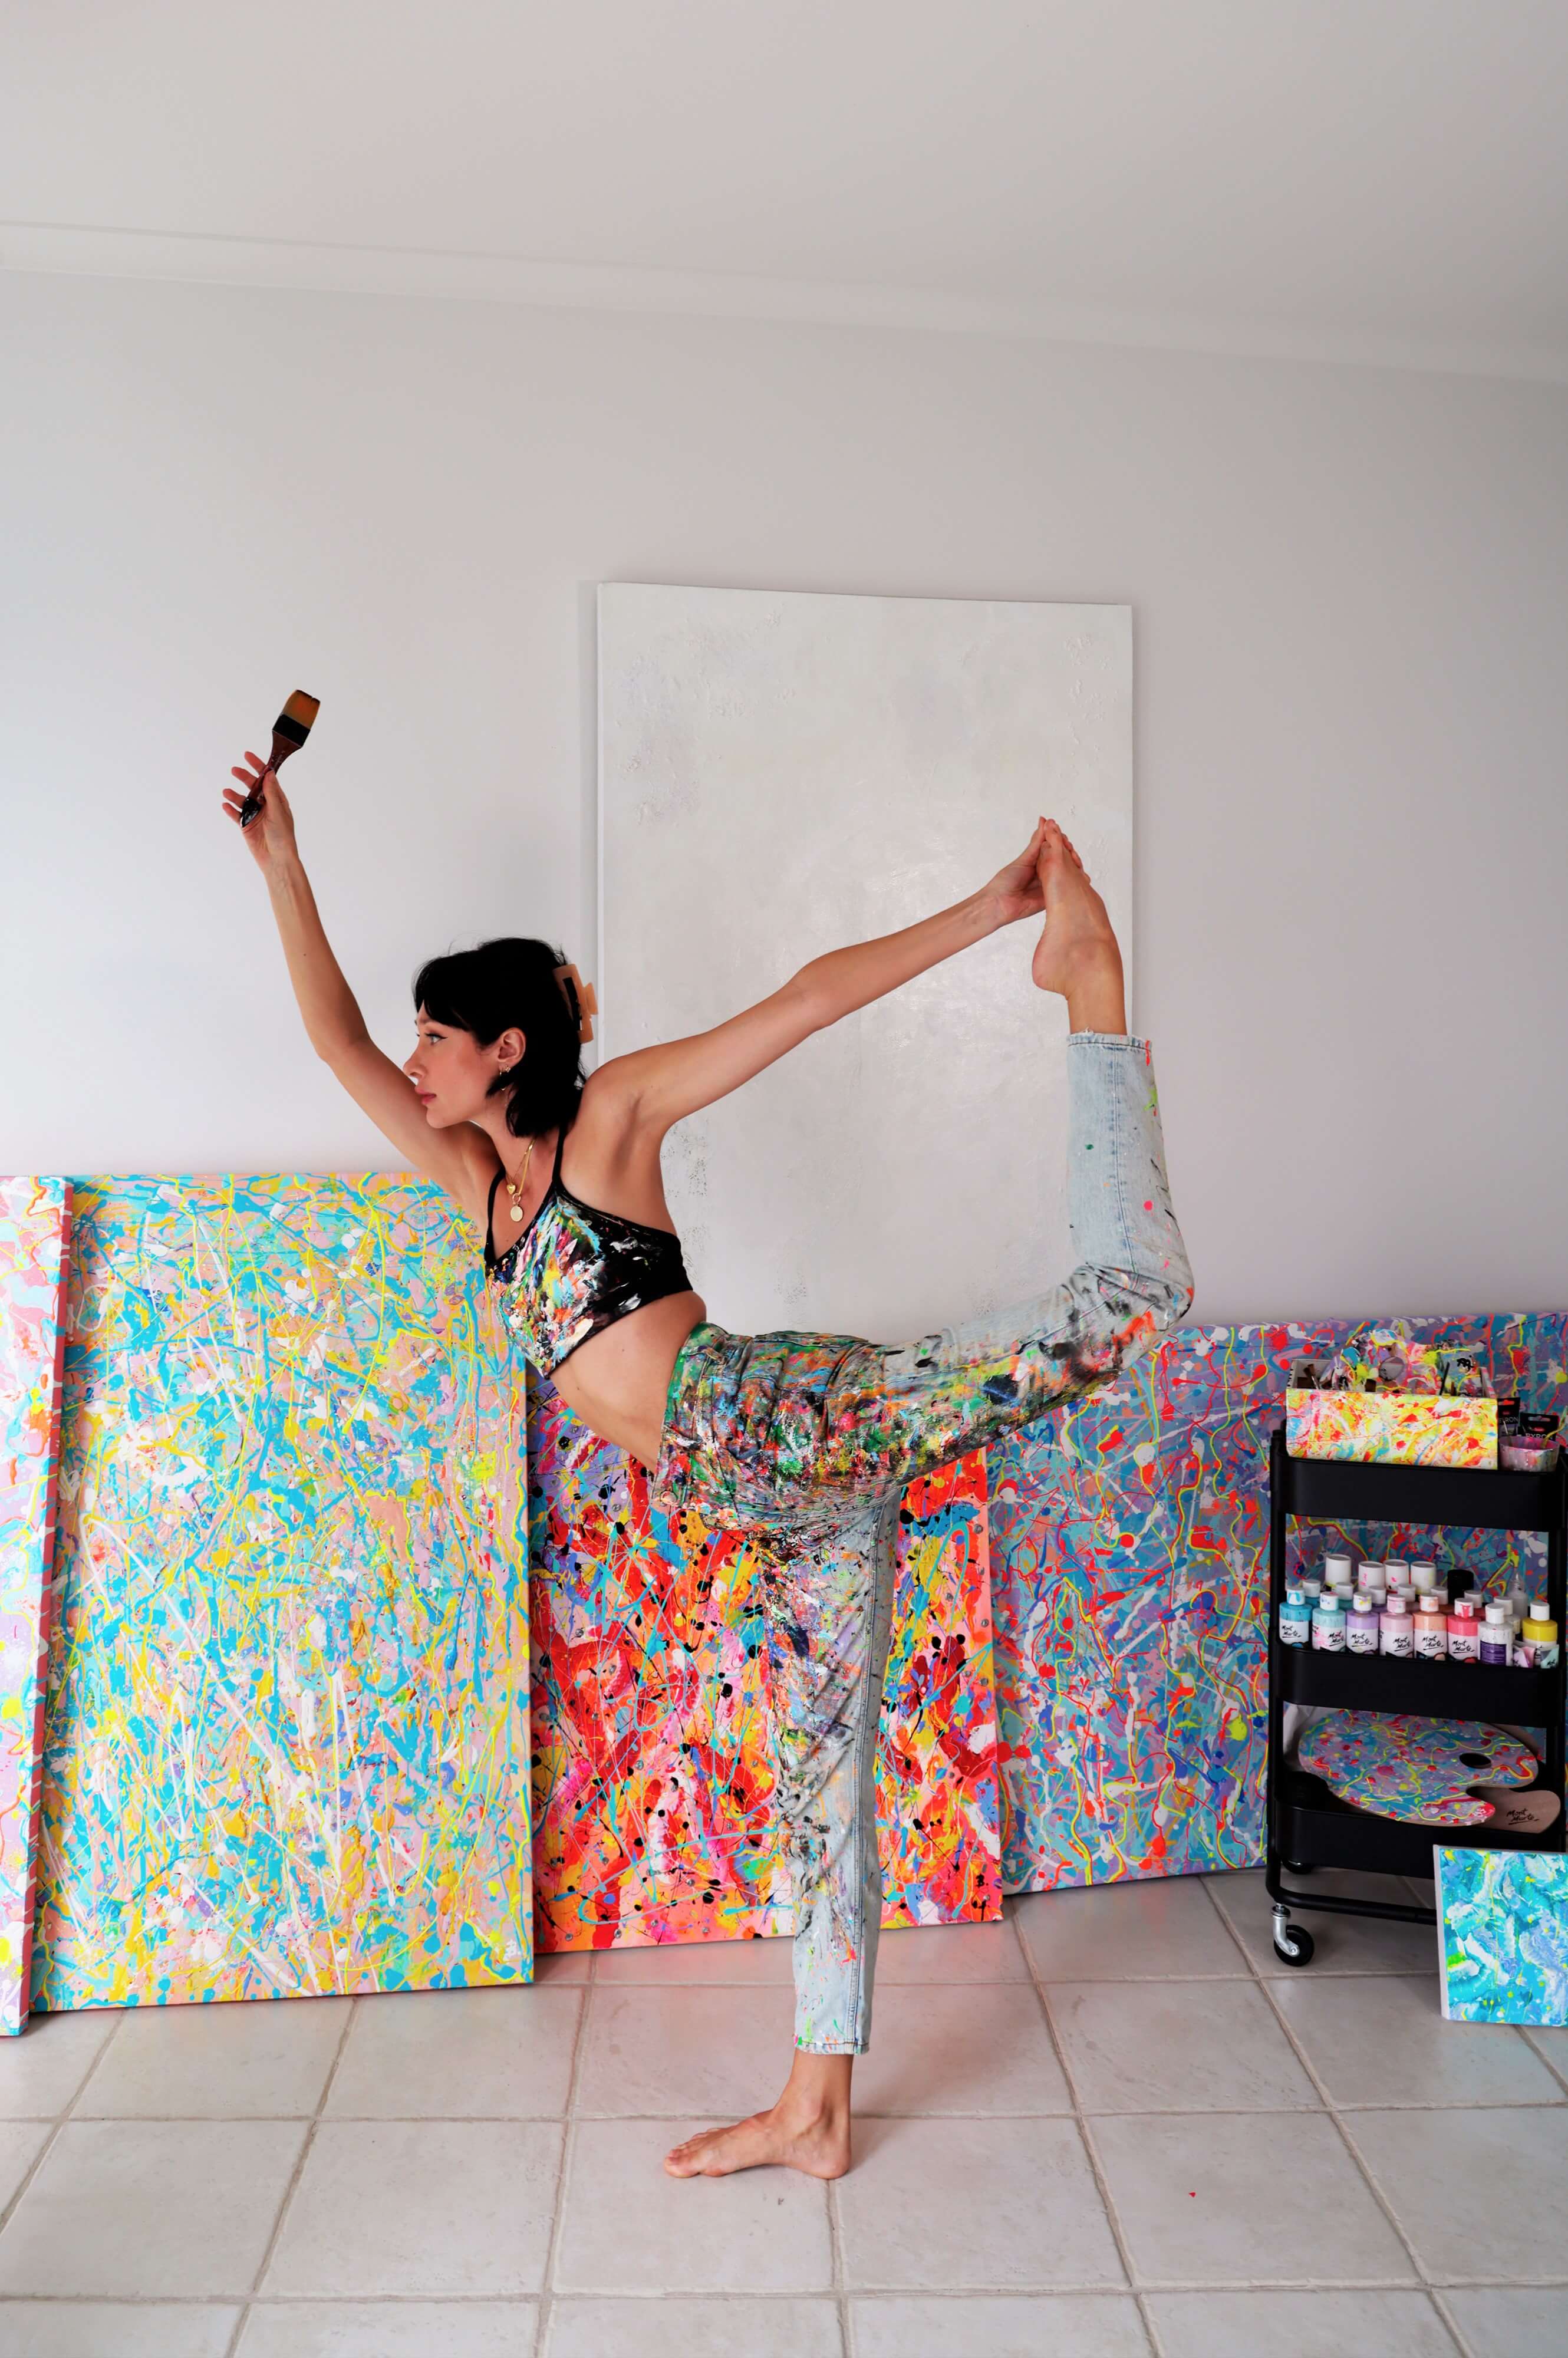 Bridget holding a paint brush in one hand and doing a yoga pose with the other. In the back are her artworks and an art trolley